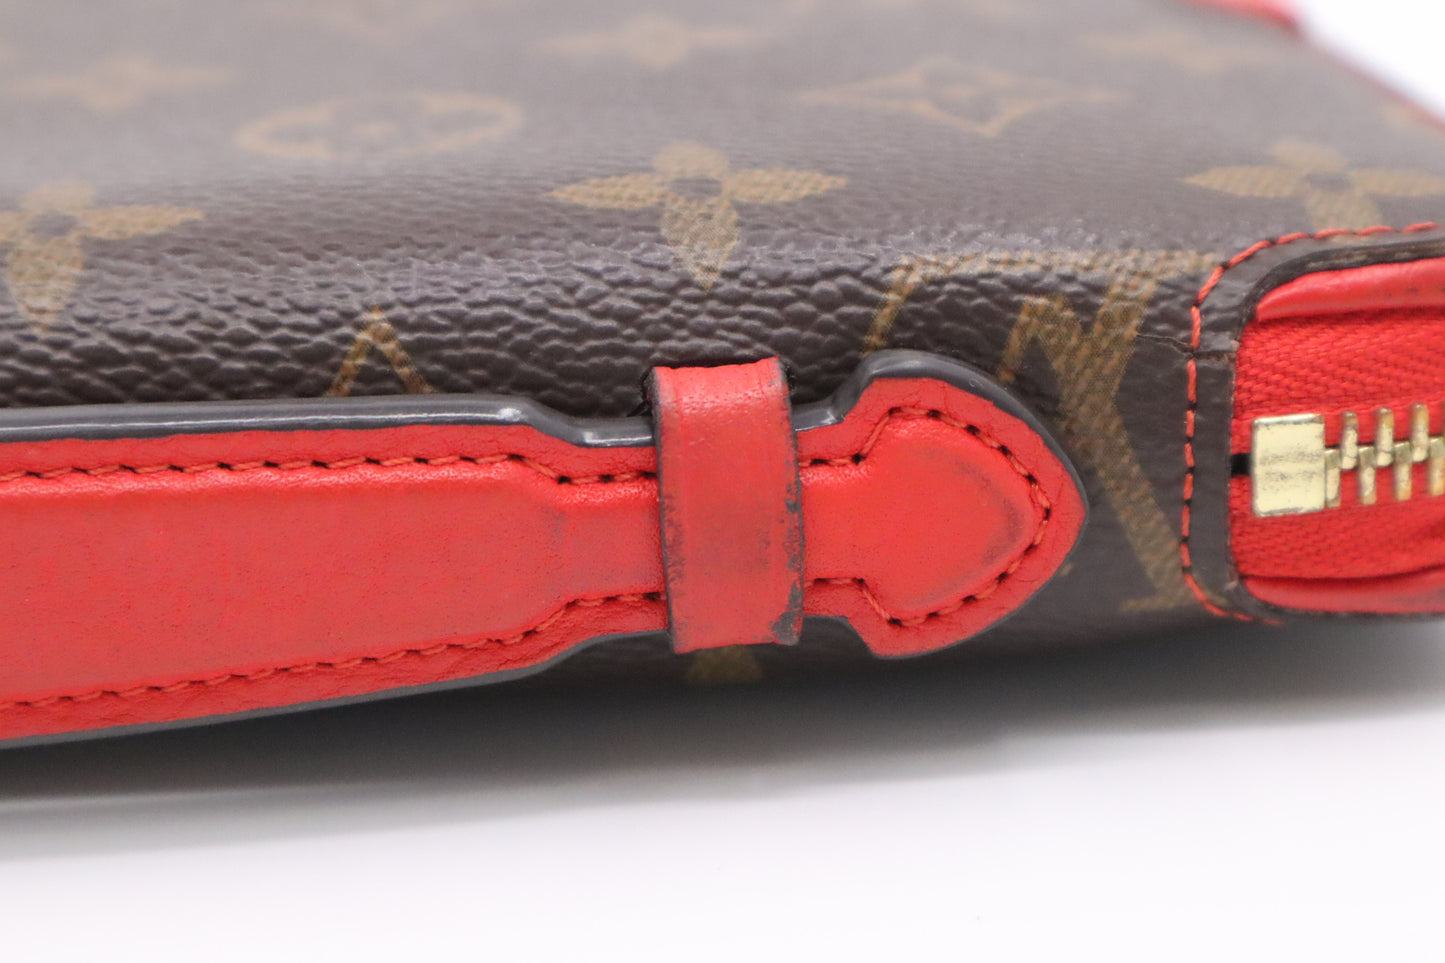 Louis Vuitton Retiro Daily Organizer in Monogram Canvas and Red Leather